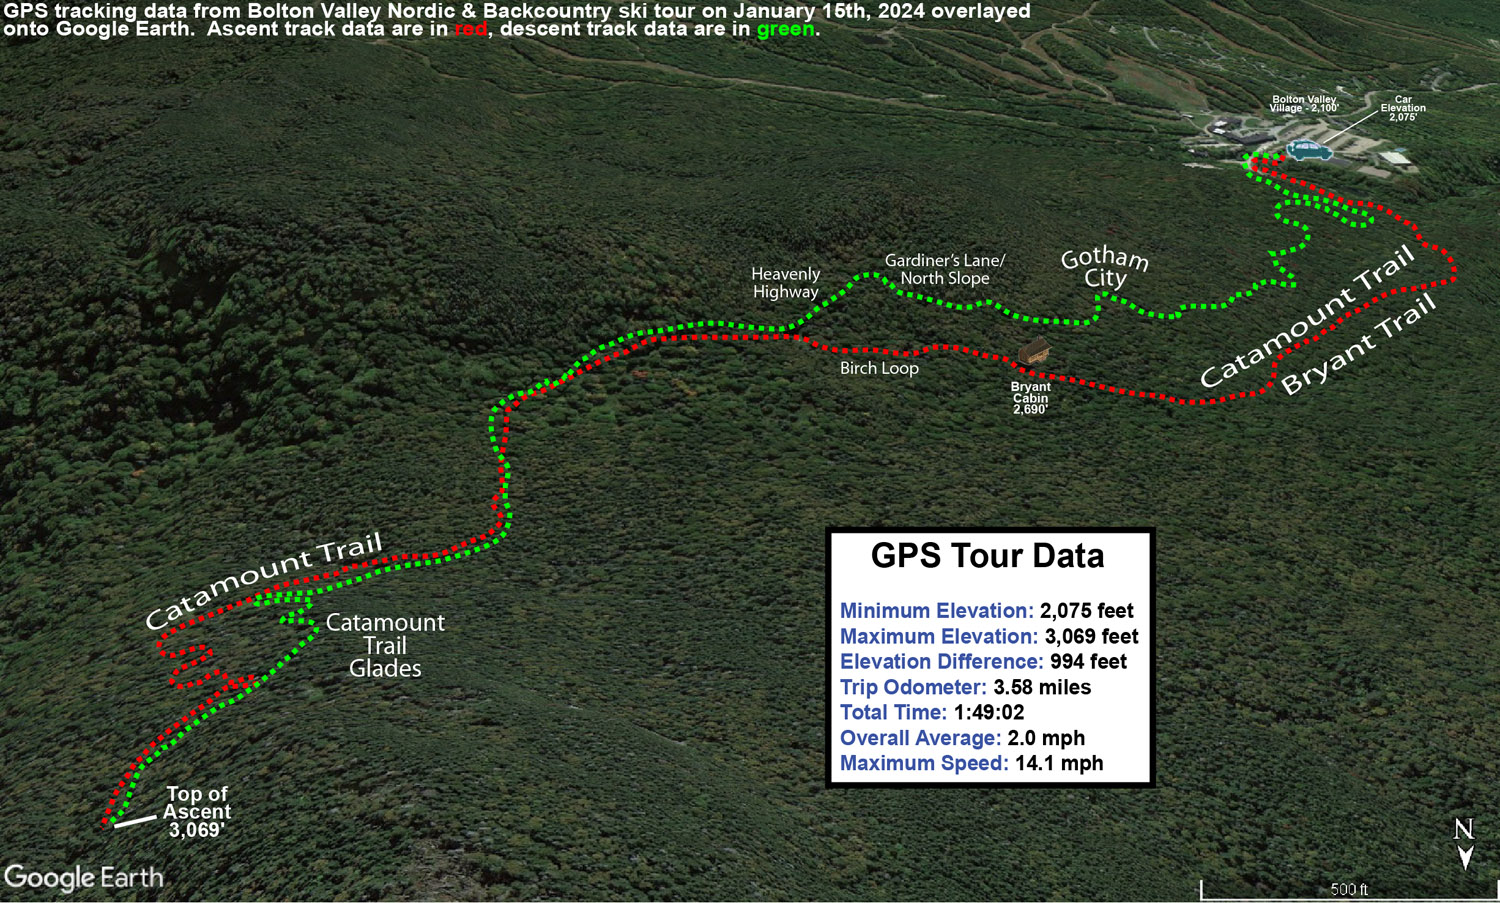 An image containing a Google Earth map with GPS tracking data from a ski tour on the Nordic and Backcountry Network of trails at Bolton Valley Ski Resort in Vermont